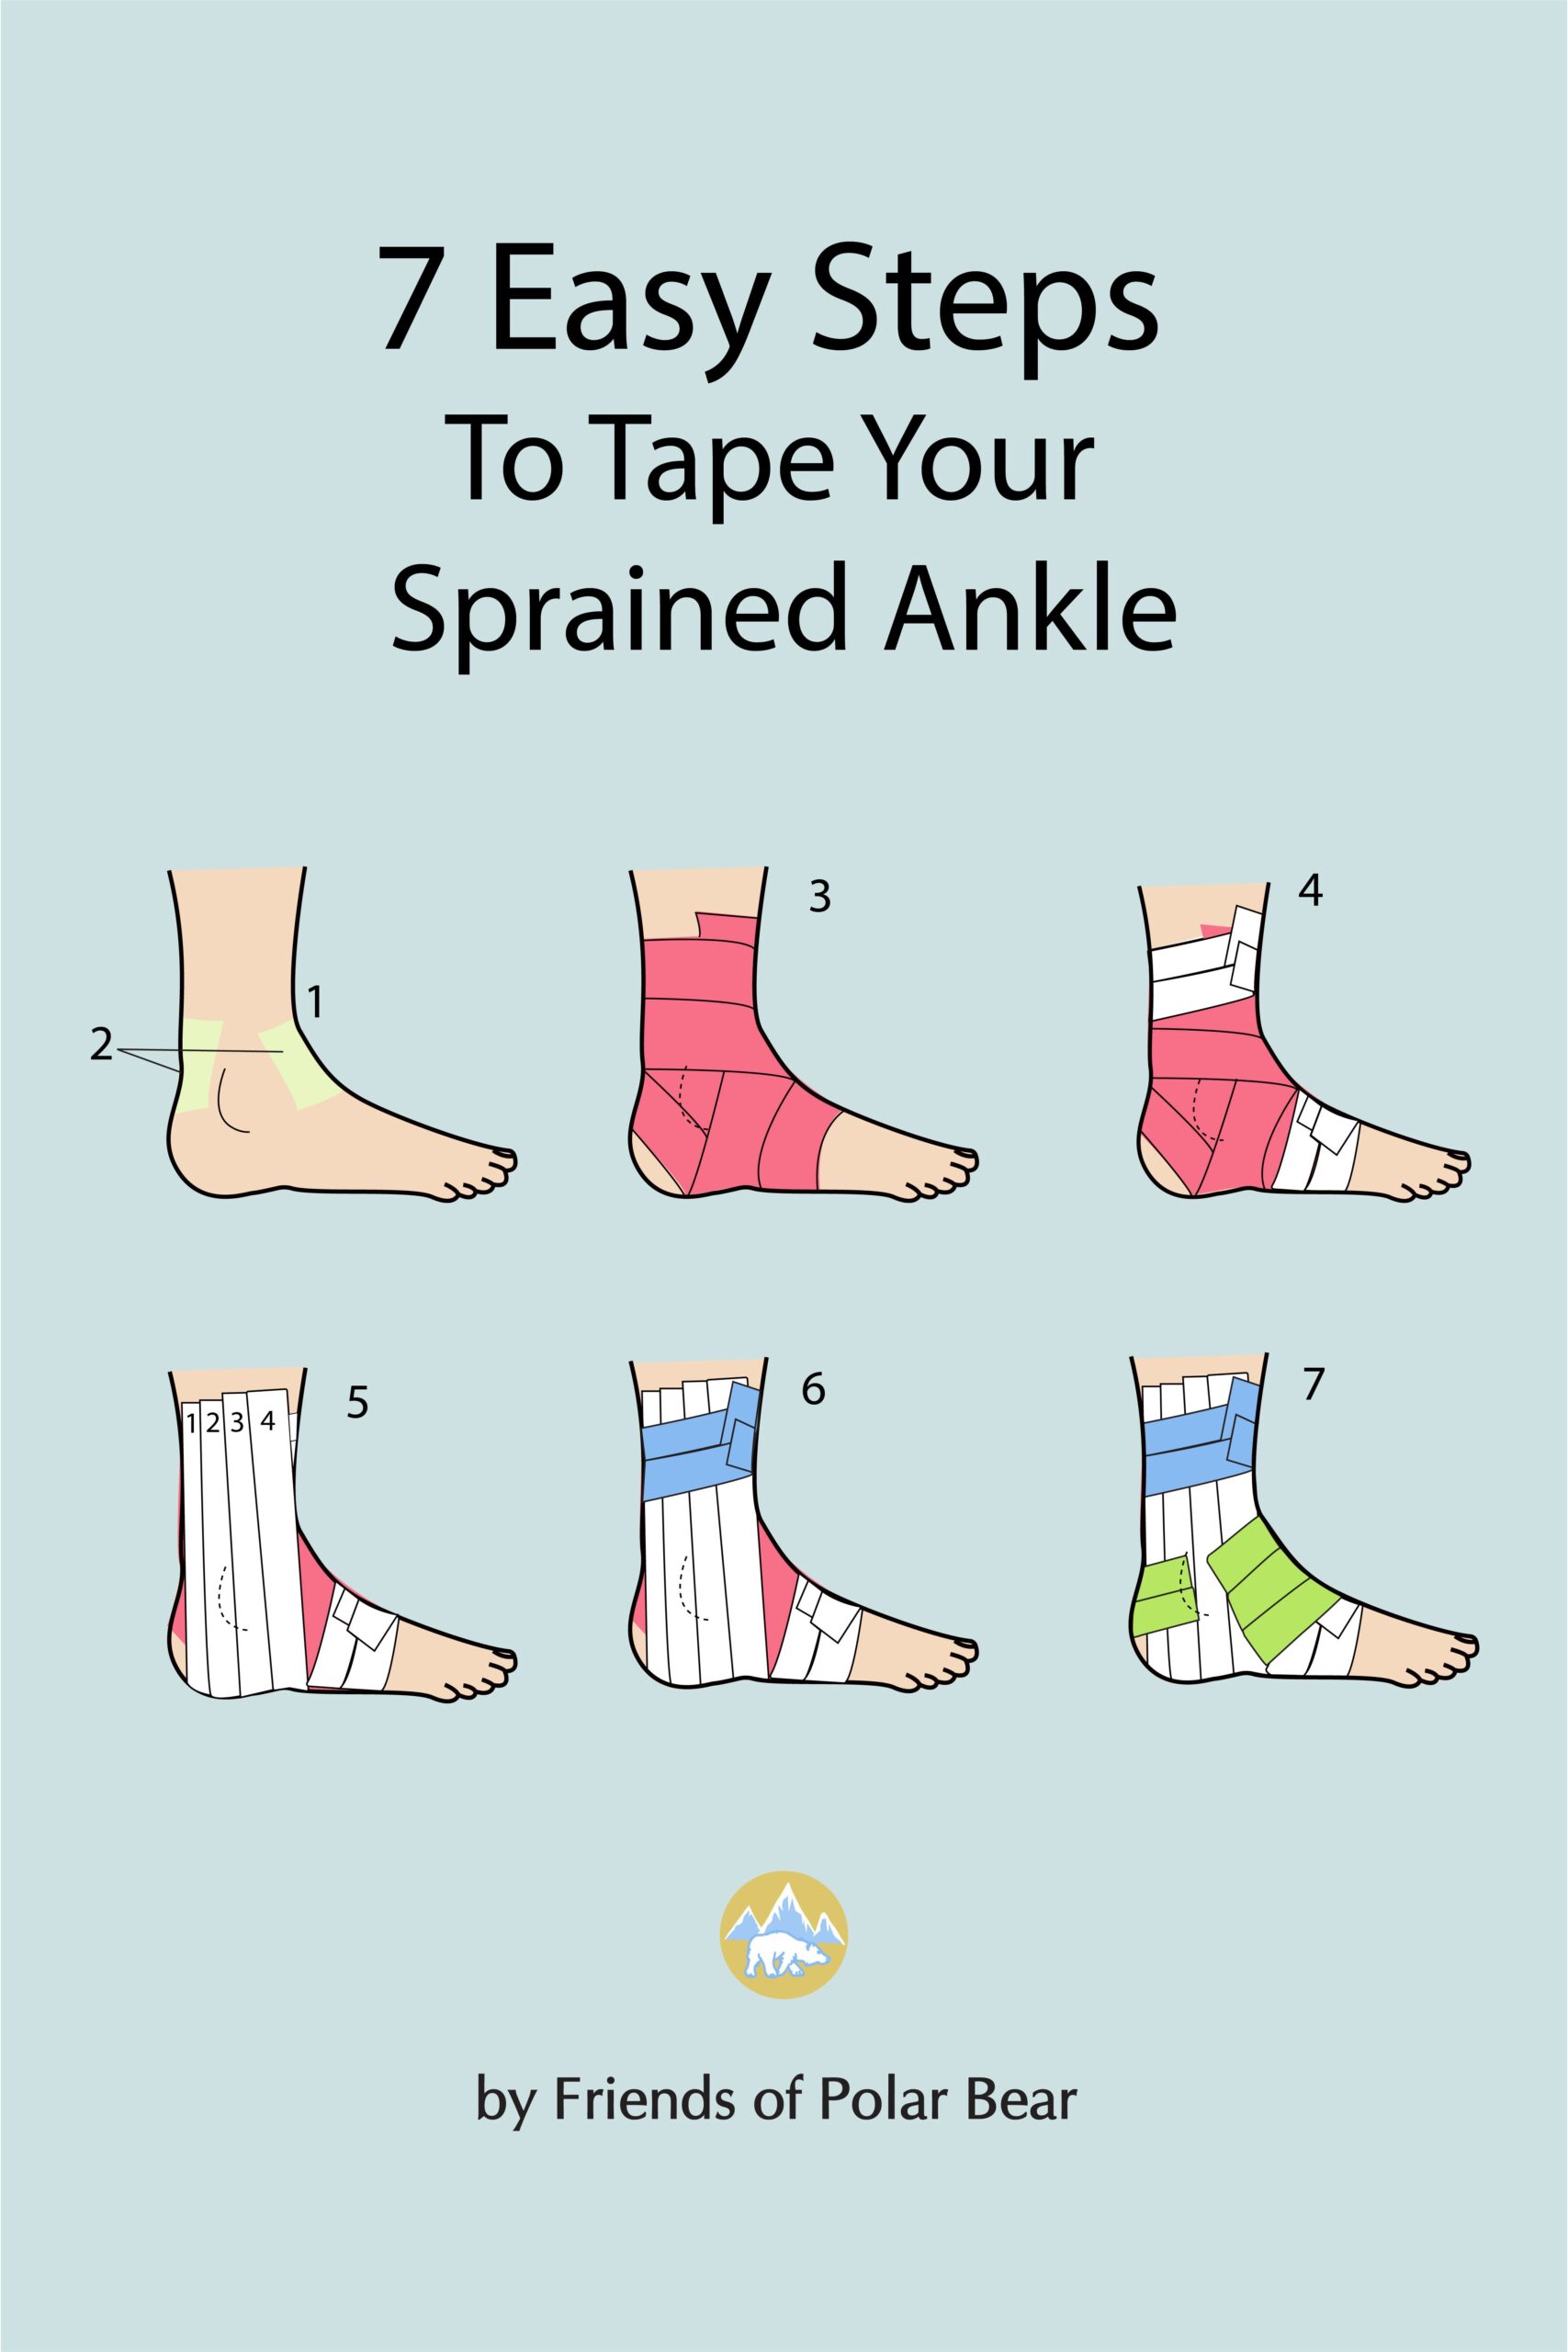 7 easy steps to tape your sprained ankle